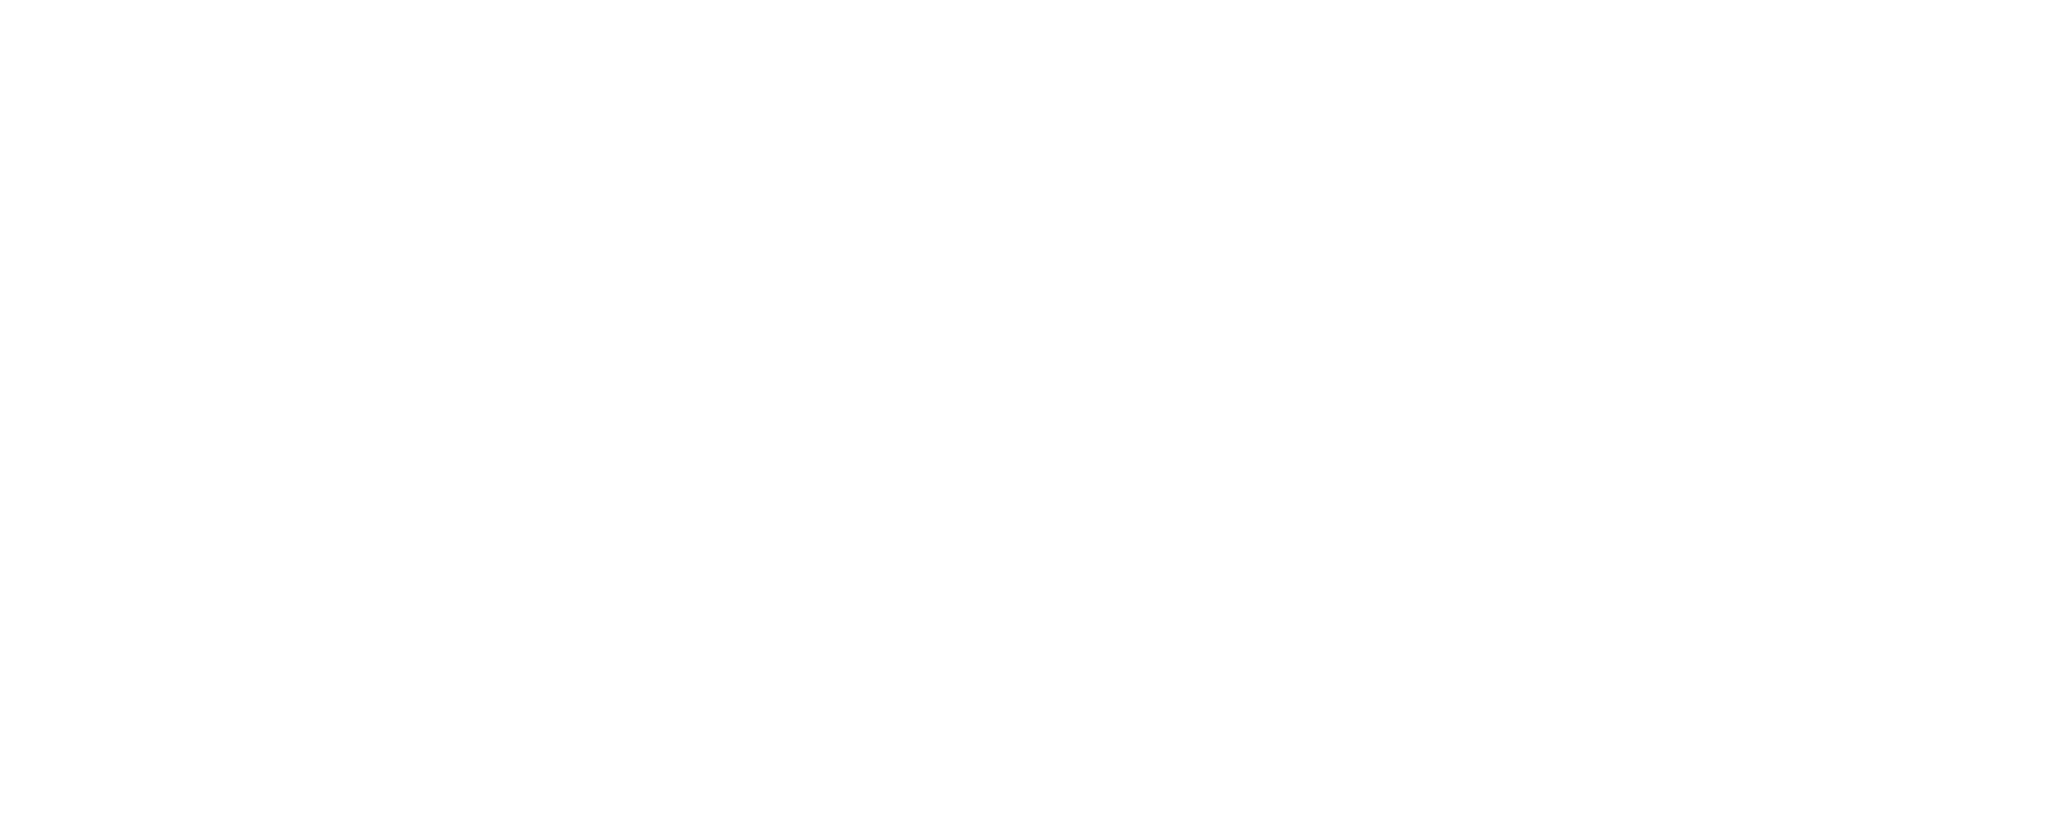 north charleston chamber of commerce, an annual event marketed by Stingray Branding